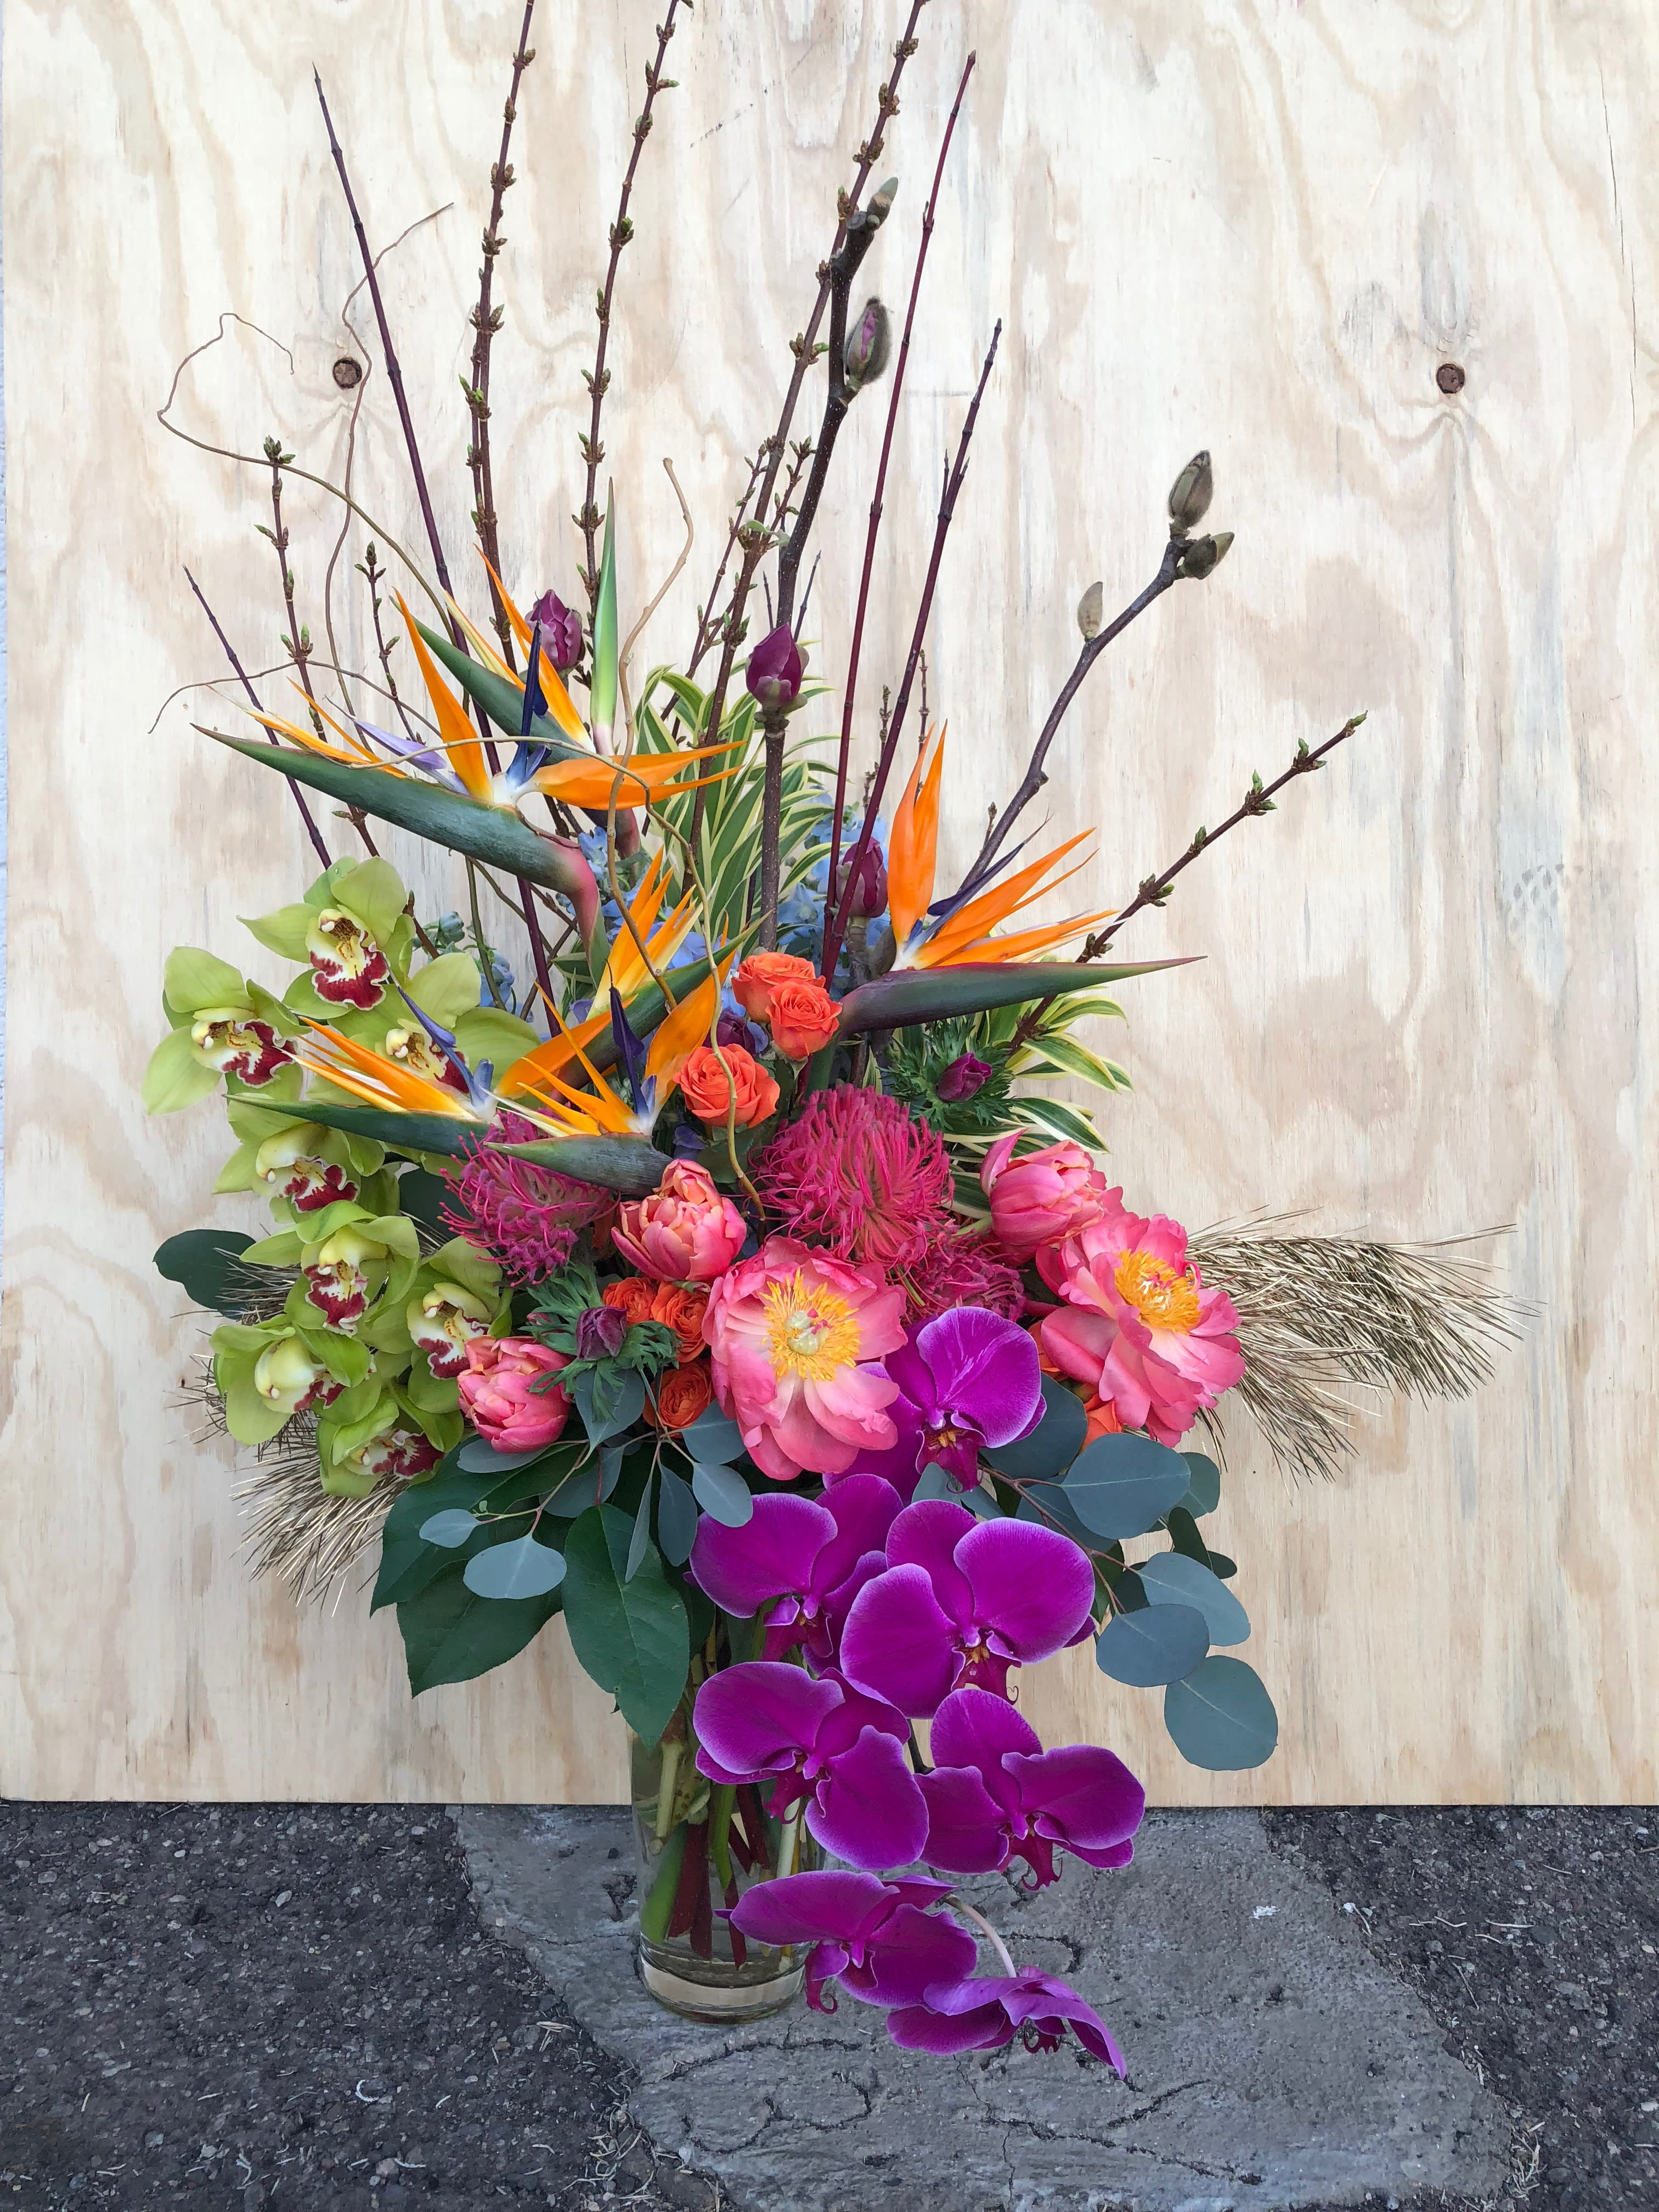 Beach, Please!  - Wanting a tropical getaway? Are you stuck at your desk or stuck at home? Deliver paradise directly to your space. This vibrant, tropical, designer's choice arrangement is sure to brighten your day!  *It's possible that some days we may not have the exact flowers depending on the season, or exact container specified on the arrangement's description. When this is the case, our bouquets are made with flower substitutions or delivered in a different vase than expected by using substitutions of an equal or higher value. If you'd prefer no substitutions, please send an email or call us after placing your order. Please give us at least three days notice if you're looking for an arrangement with no substitutions.